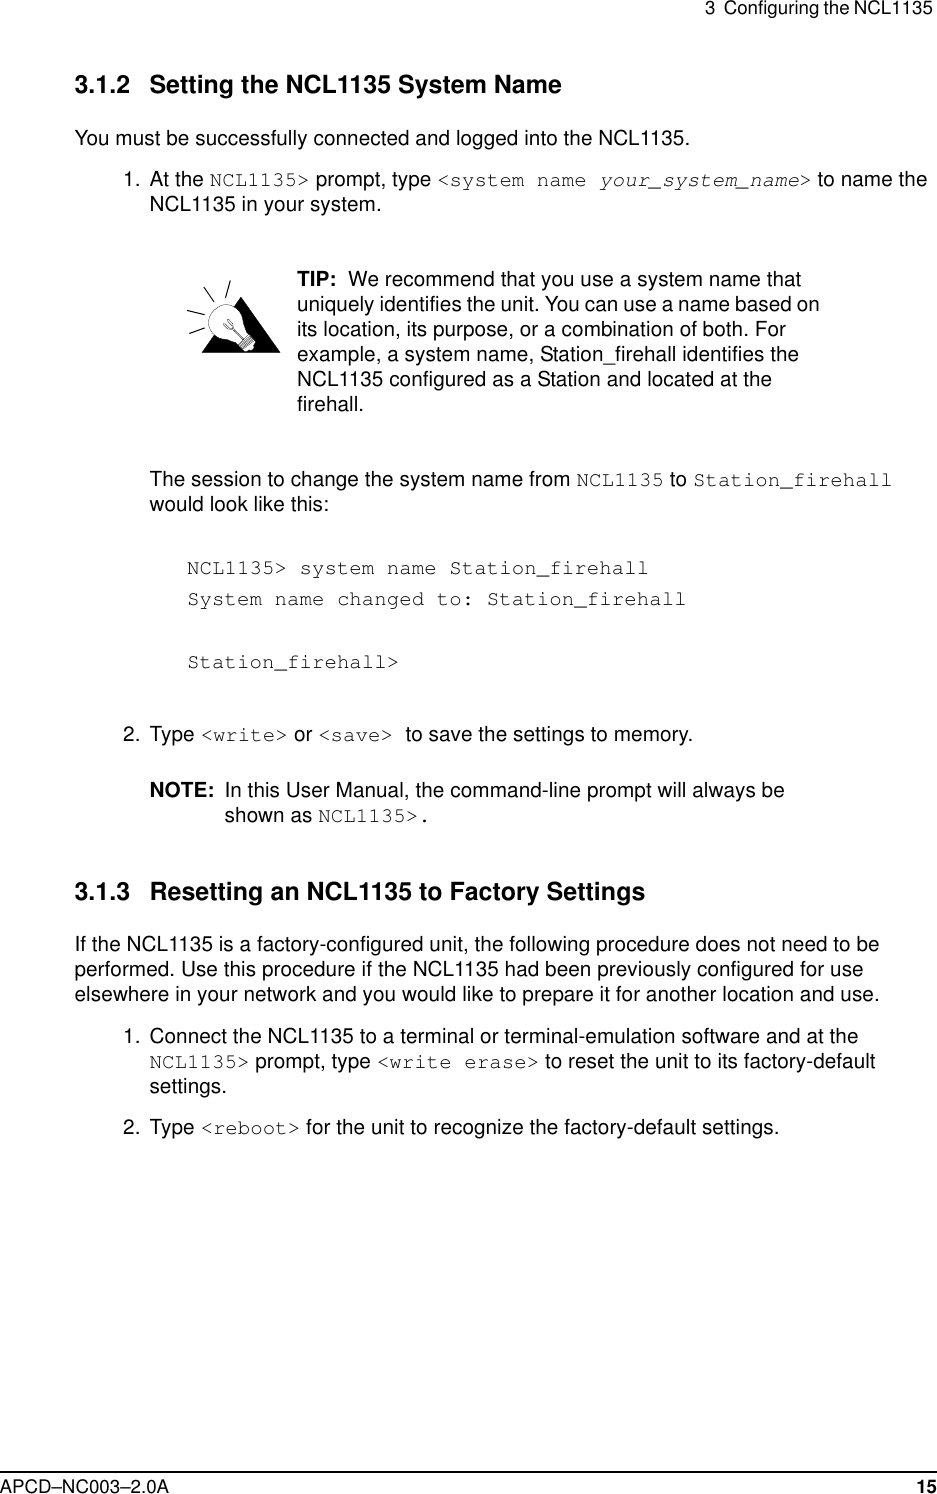 3  Configuring the NCL1135 APCD–NC003–2.0A 153.1.2 Setting the NCL1135 System NameYou must be successfully connected and logged into the NCL1135. 1. At the NCL1135&gt; prompt, type &lt;system name your_system_name&gt; to name the NCL1135 in your system.TIP:  We recommend that you use a system name that uniquely identifies the unit. You can use a name based on its location, its purpose, or a combination of both. For example, a system name, Station_firehall identifies the NCL1135 configured as a Station and located at the firehall. The session to change the system name from NCL1135 to Station_firehall would look like this:NCL1135&gt; system name Station_firehallSystem name changed to: Station_firehallStation_firehall&gt; 2. Type &lt;write&gt; or &lt;save&gt; to save the settings to memory. NOTE: In this User Manual, the command-line prompt will always be shown as NCL1135&gt;.3.1.3 Resetting an NCL1135 to Factory SettingsIf the NCL1135 is a factory-configured unit, the following procedure does not need to be performed. Use this procedure if the NCL1135 had been previously configured for use elsewhere in your network and you would like to prepare it for another location and use.  1.  Connect the NCL1135 to a terminal or terminal-emulation software and at the NCL1135&gt; prompt, type &lt;write erase&gt; to reset the unit to its factory-default settings.  2. Type &lt;reboot&gt; for the unit to recognize the factory-default settings.